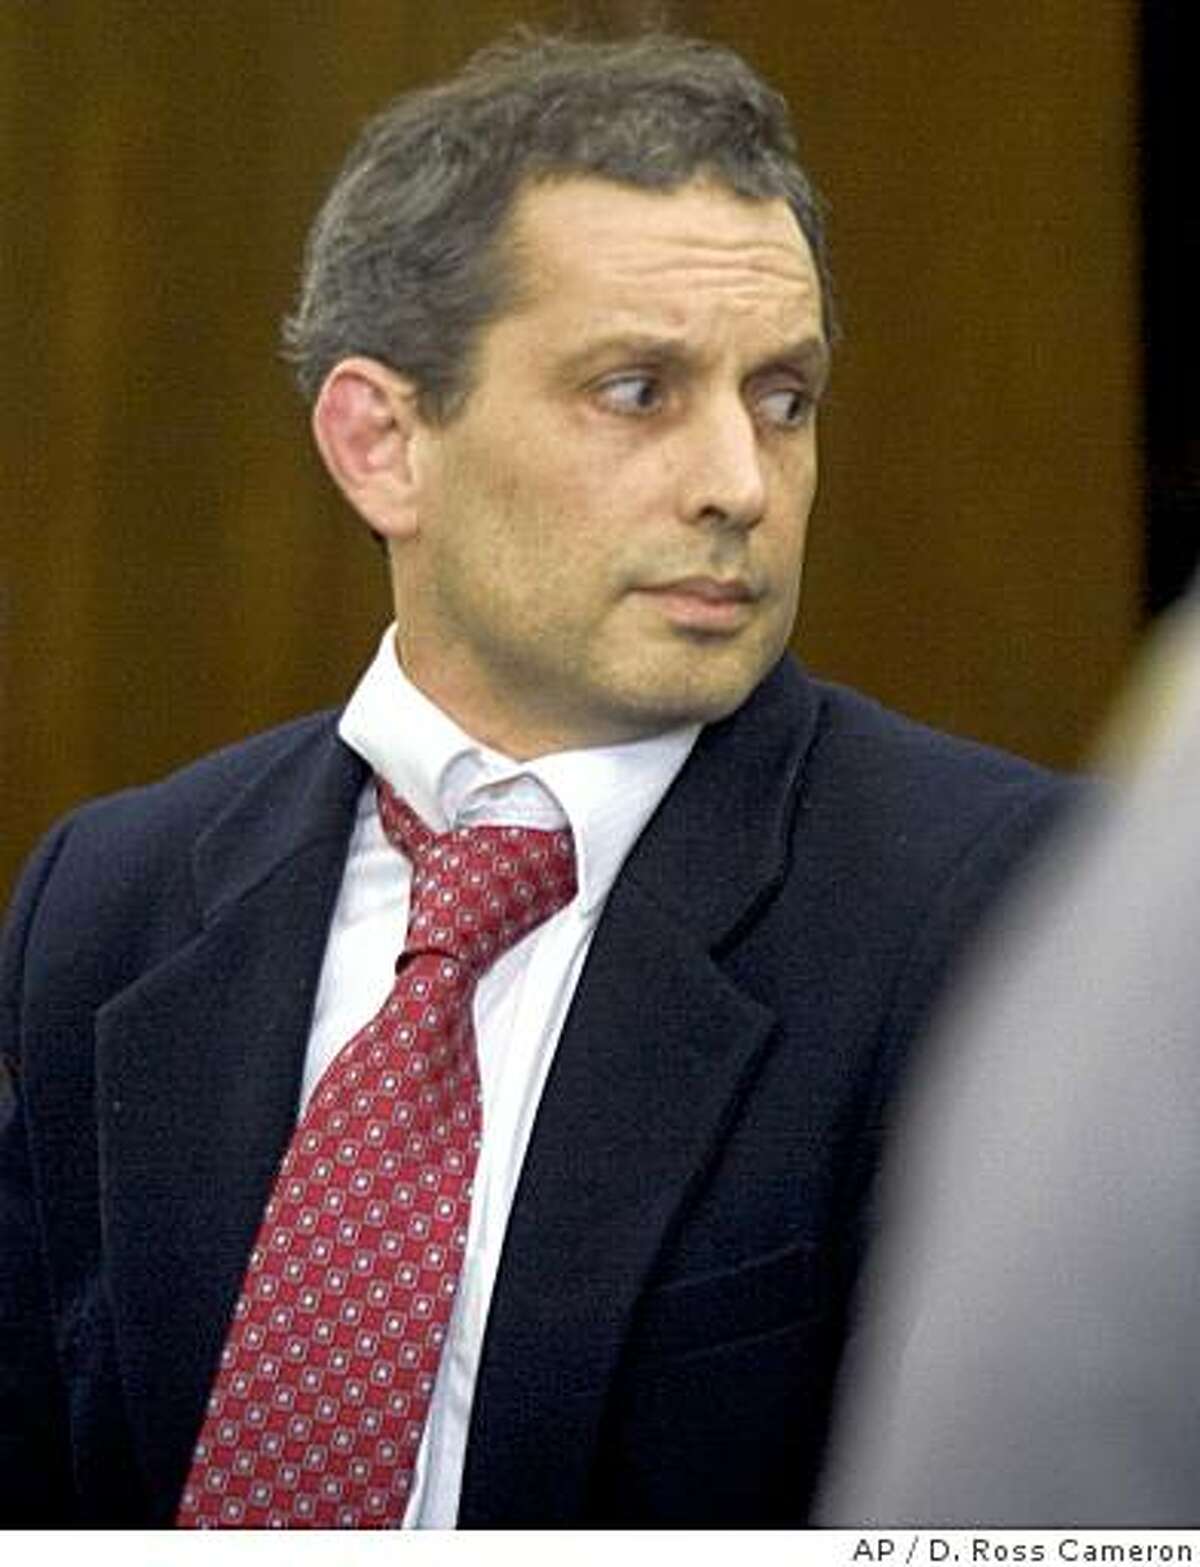 ** FILE ** In this Monday, April 28, 2008 file picture, Hans Reiser is escorted from the courtroom following the reading of the verdict in his murder trial in Oakland, Calif. The California software programmer convicted of killing his estranged wife, Nina Riser, has led police to a corpse that is believed to be hers. An attorney for Hans Reiser said his client led police to a wooded area of Redwood Regional Park in the Oakland hills. (AP Photo/D. Ross Cameron, Pool)